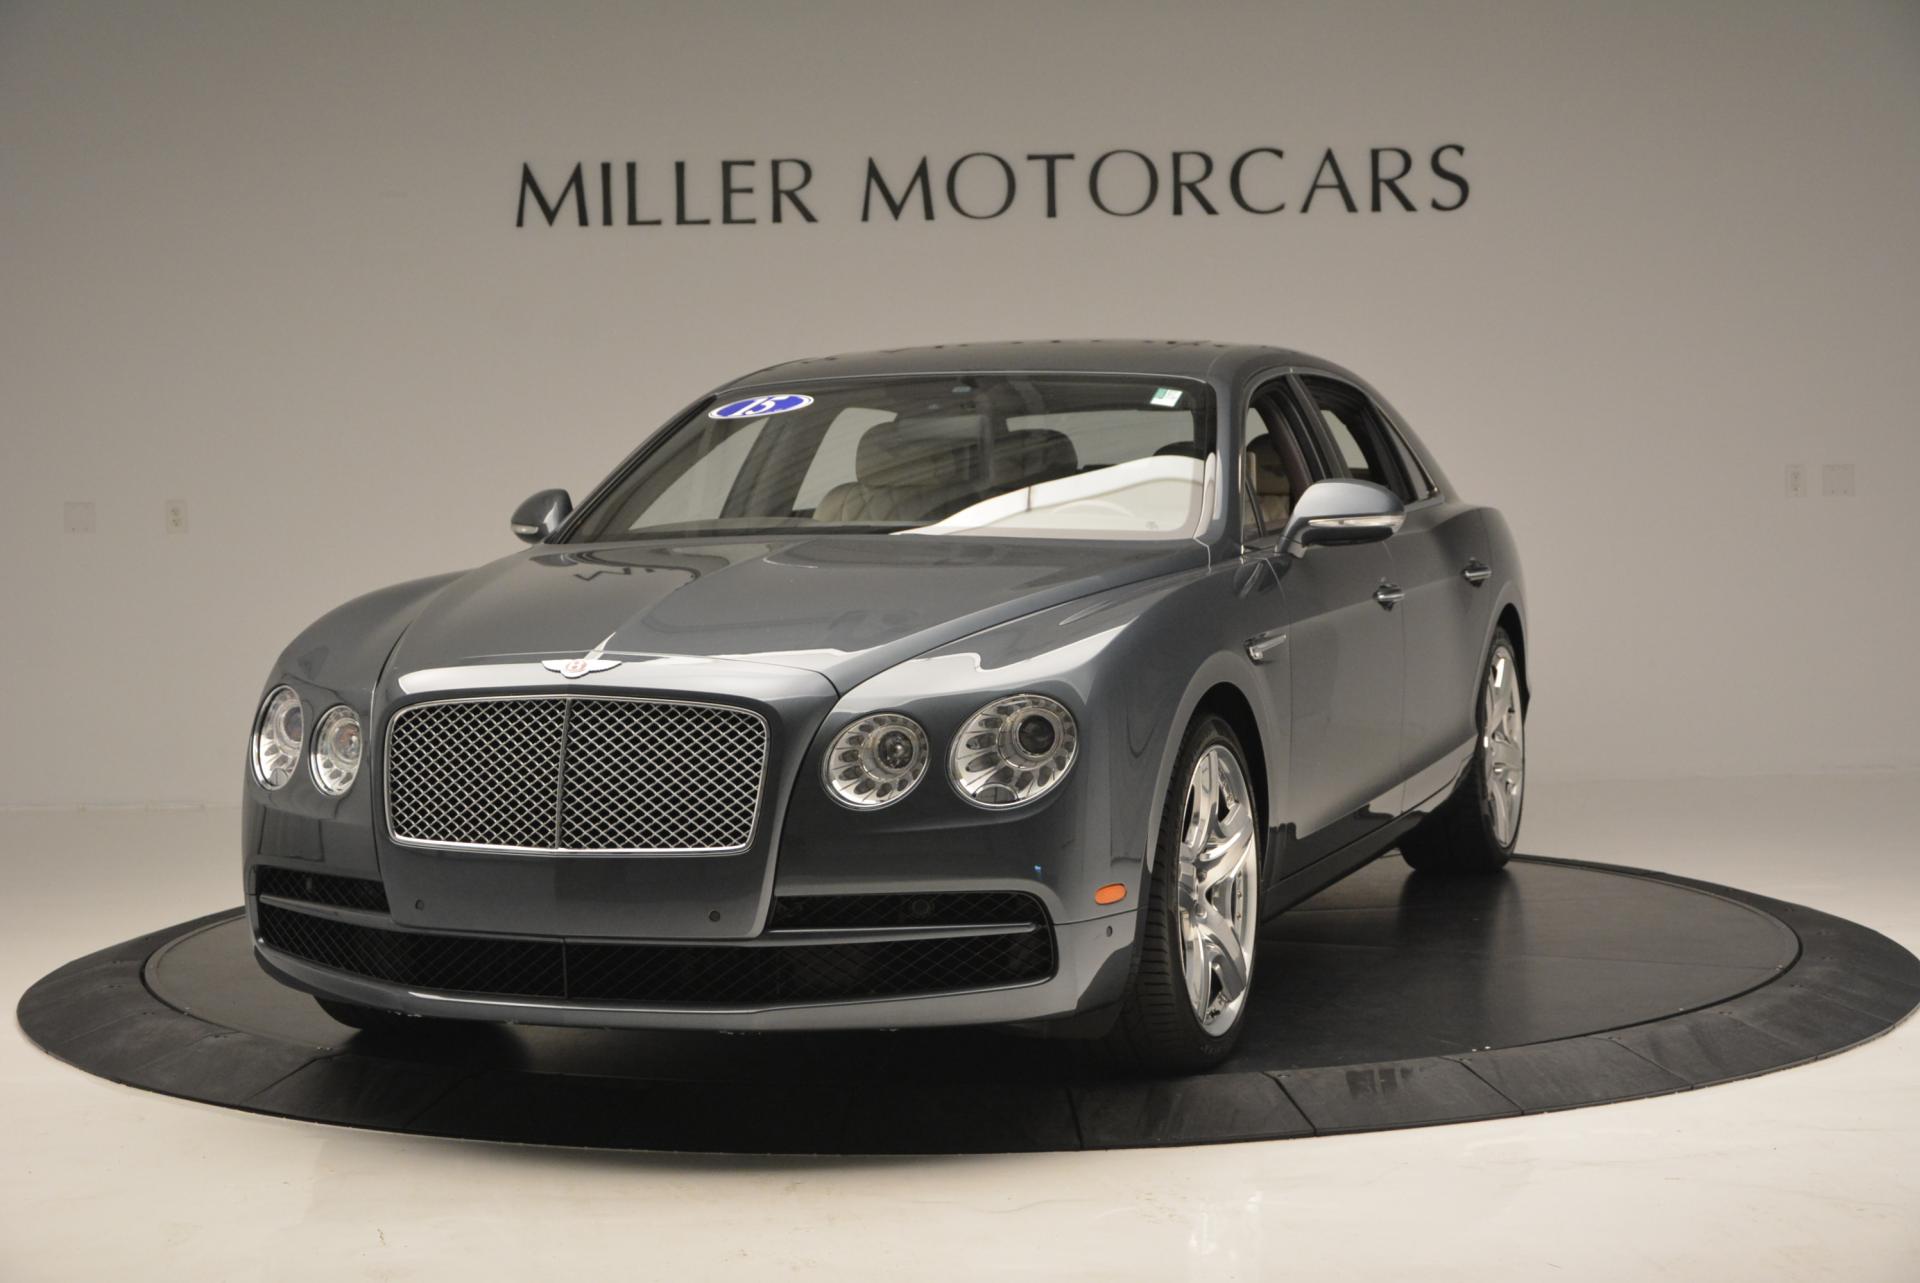 Used 2015 Bentley Flying Spur V8 for sale Sold at Pagani of Greenwich in Greenwich CT 06830 1